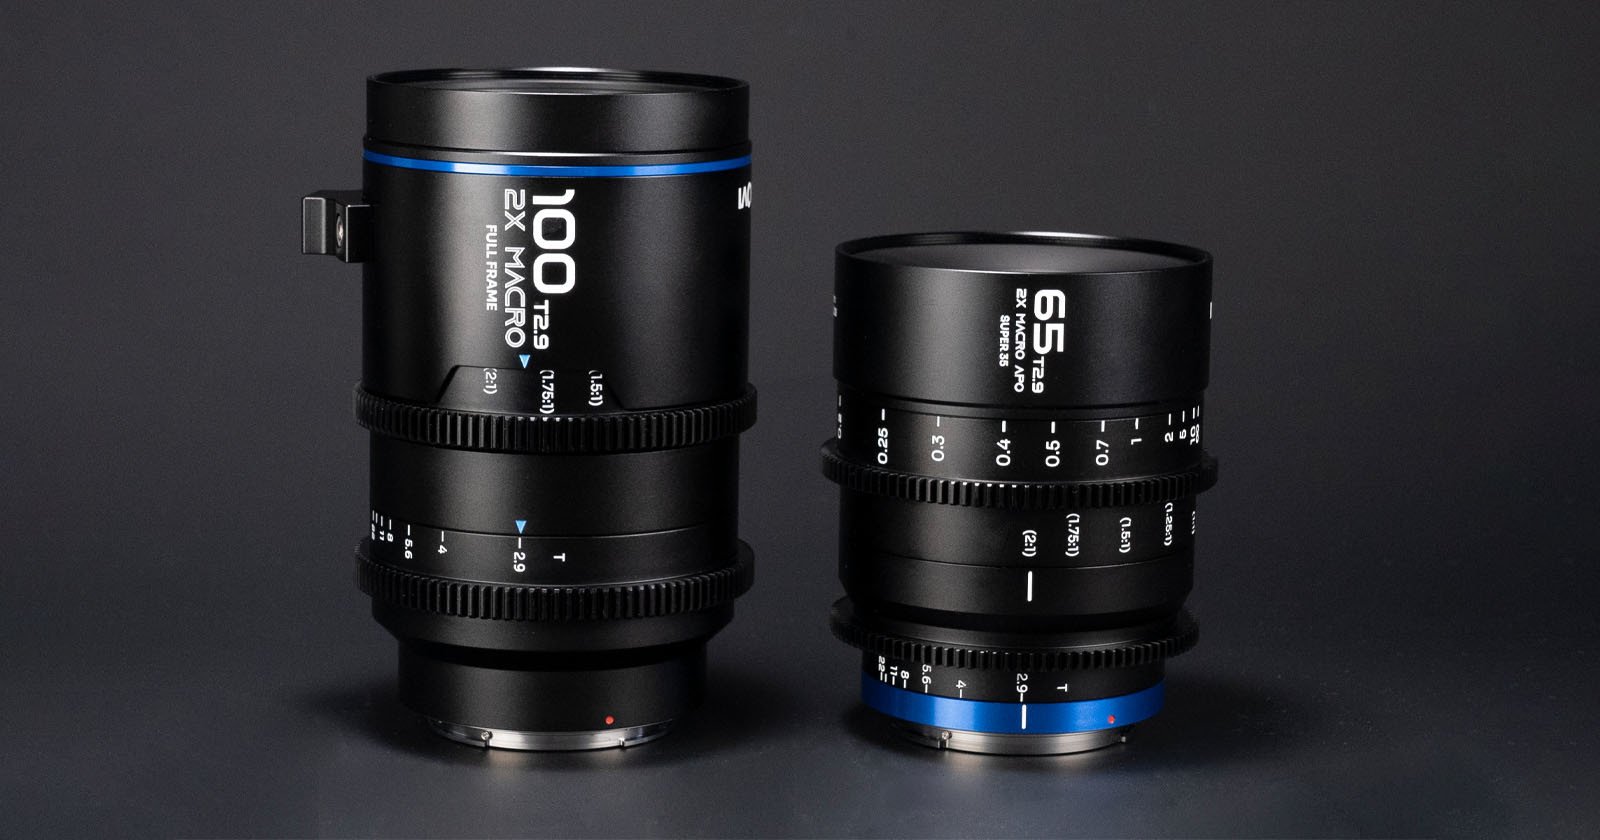 Laowas Two New Macro Cine Lenses are the First with 2x Magnification